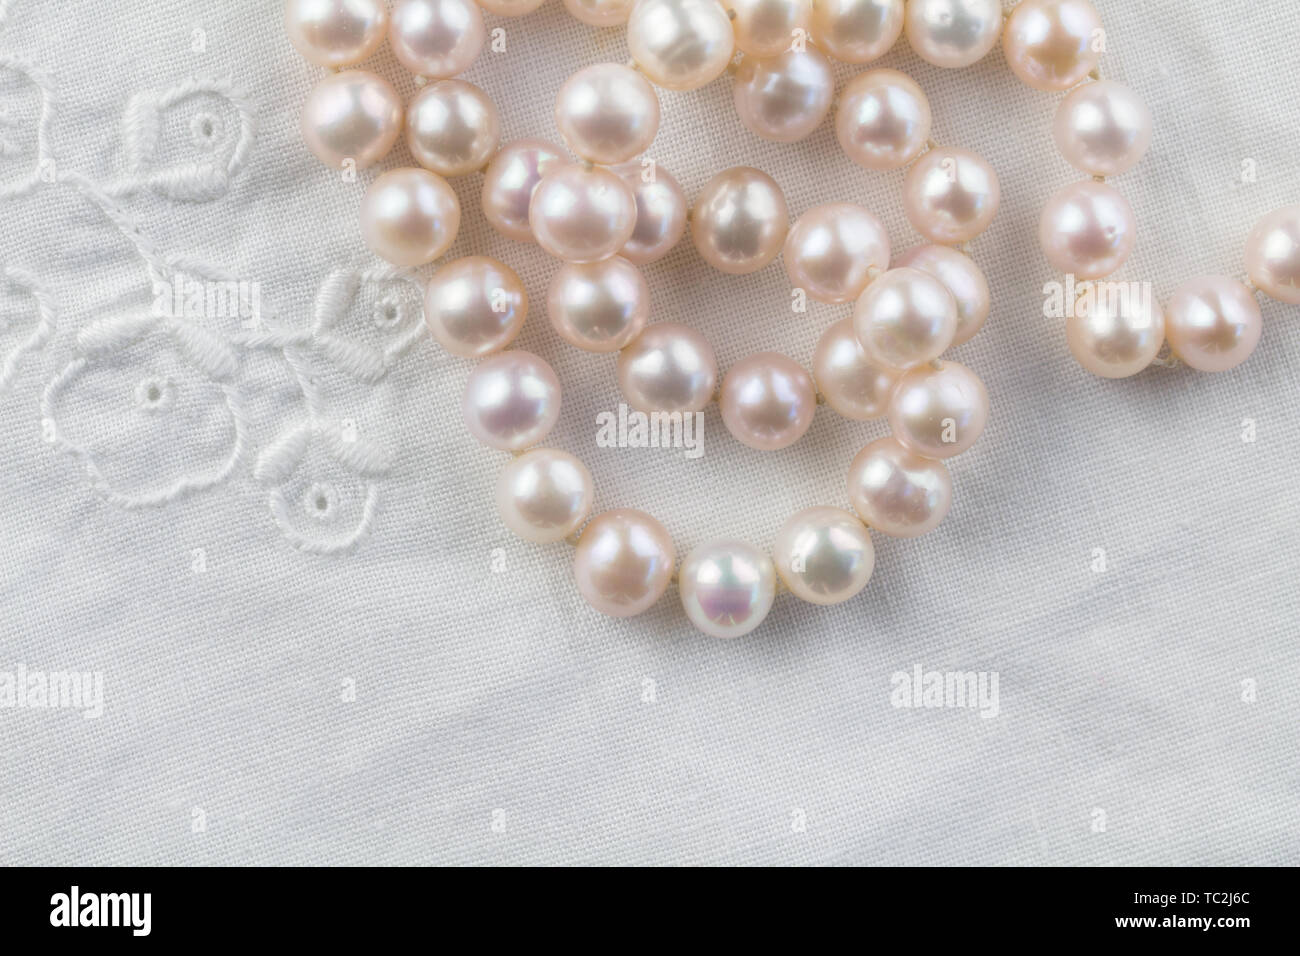 Pearl necklace on white embroidered linen background - top view photo of real pink pearls Stock Photo